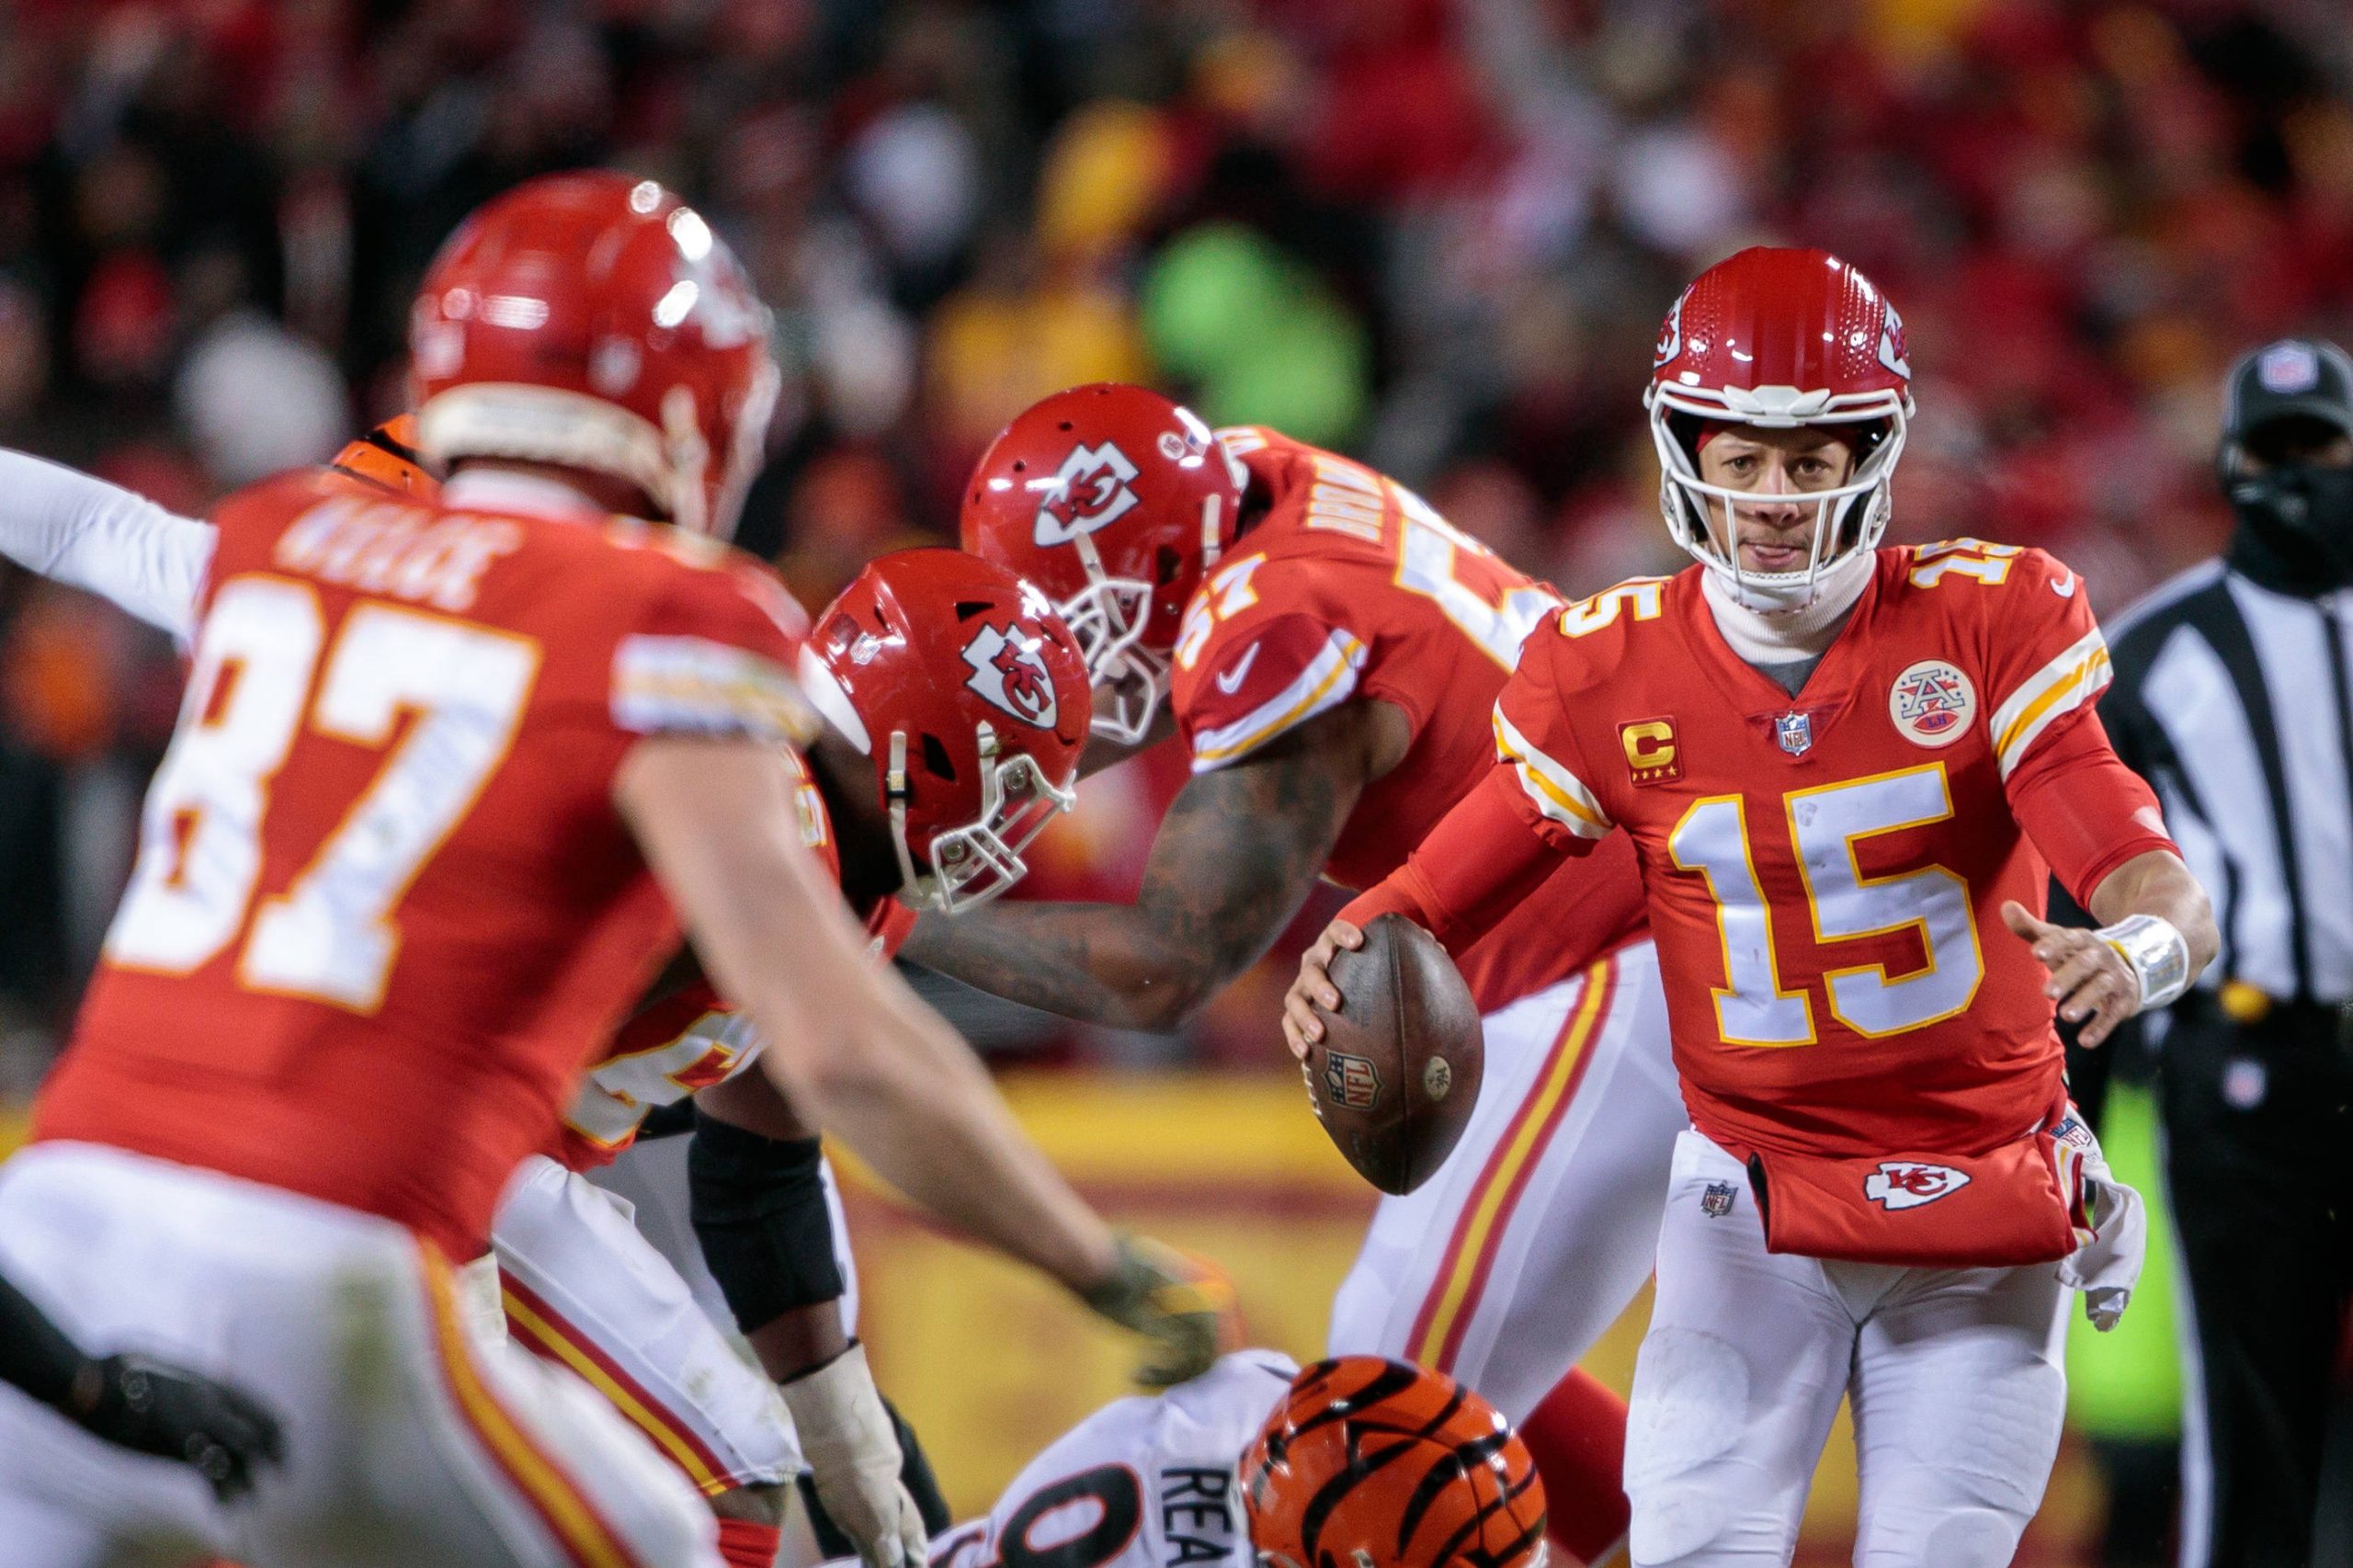 KANSAS CITY, MO - JANUARY 29: Kansas City Chiefs quarterback Patrick Mahomes 15 looks to pass to Kansas City Chiefs tight end Travis Kelce 87 during the game against the Cincinnati Bengals on January 29th, 2023 at Arrowhead Stadium in Kansas City, Missouri. Photo by William Purnell/Icon Sportswire NFL, American Football Herren, USA JAN 29 AFC Championship - Bengals at Chiefs Icon2301291501